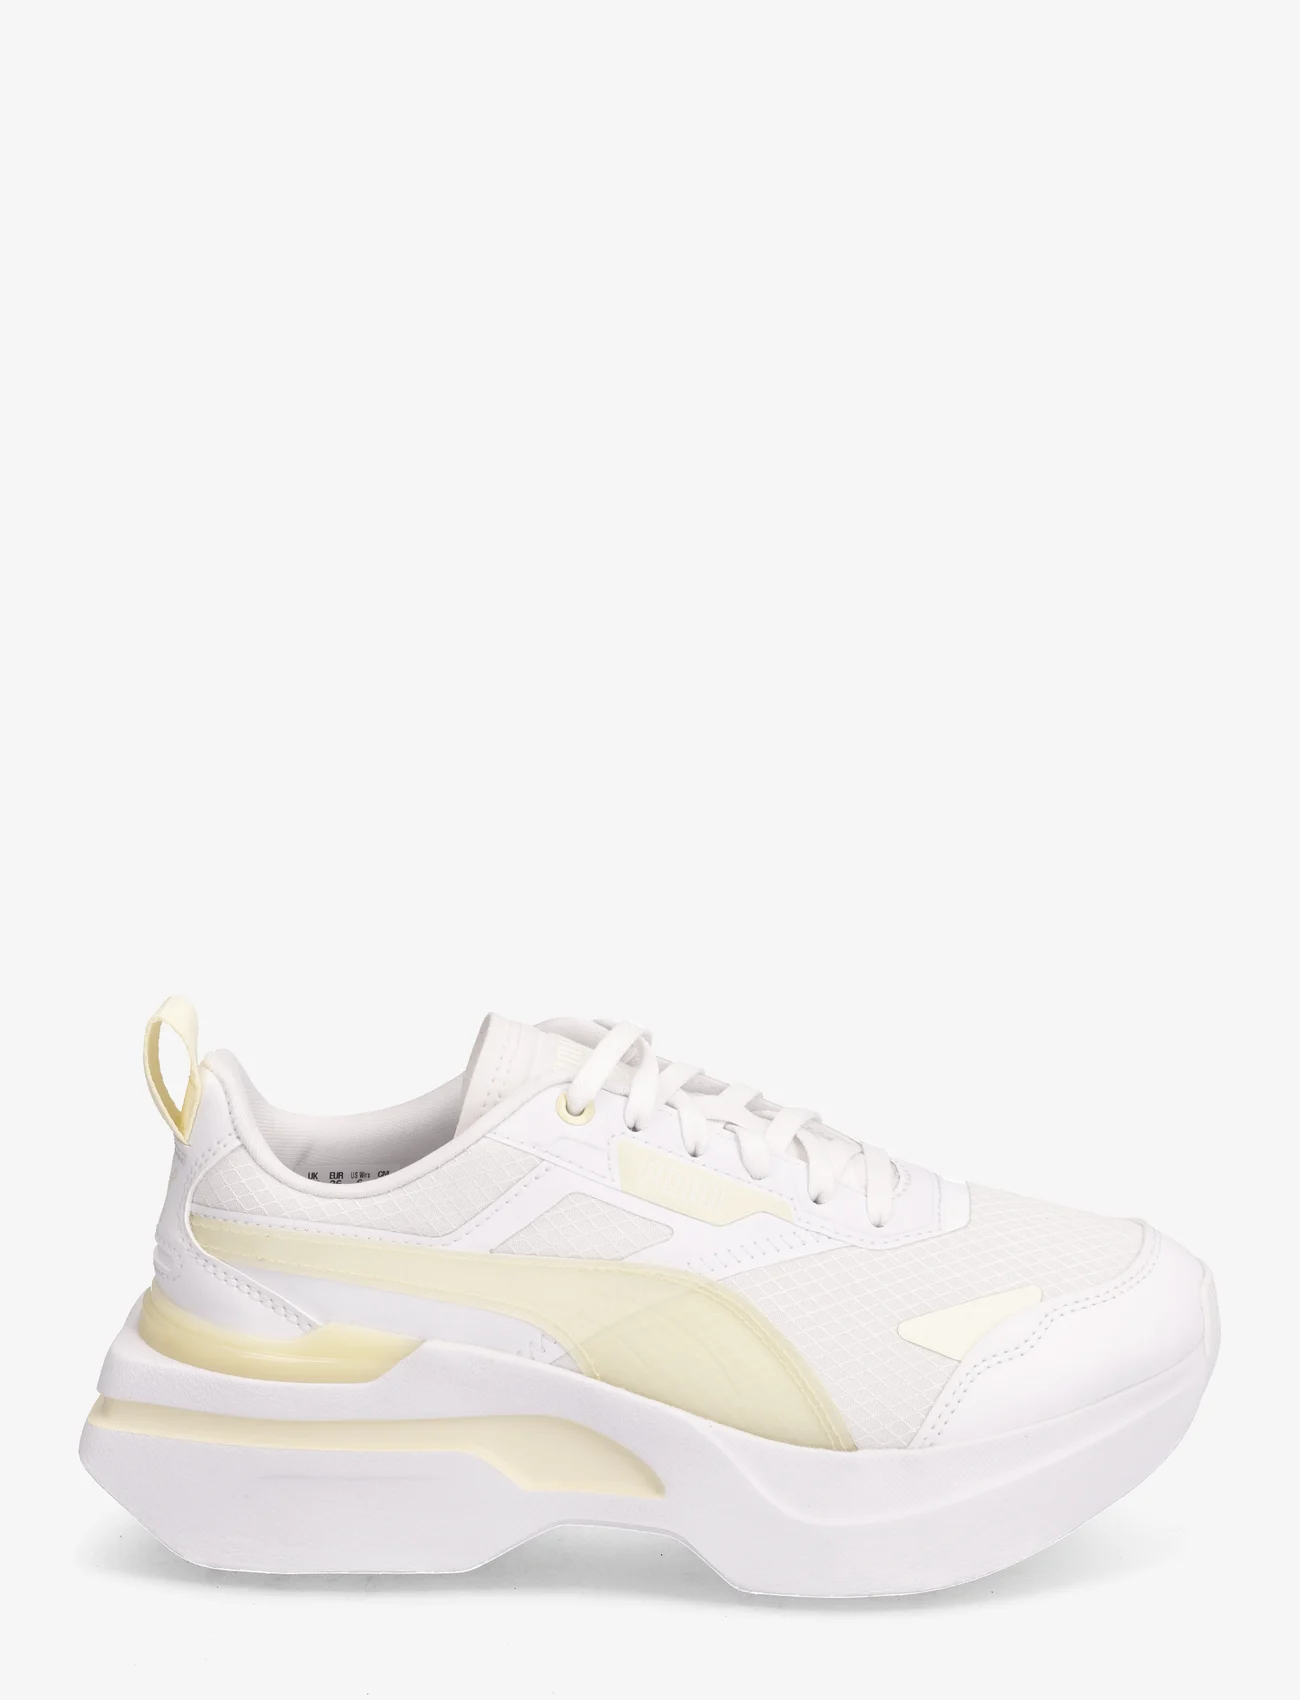 PUMA - Kosmo Rider Tech Wns - low top sneakers - puma white-anise flower - 1